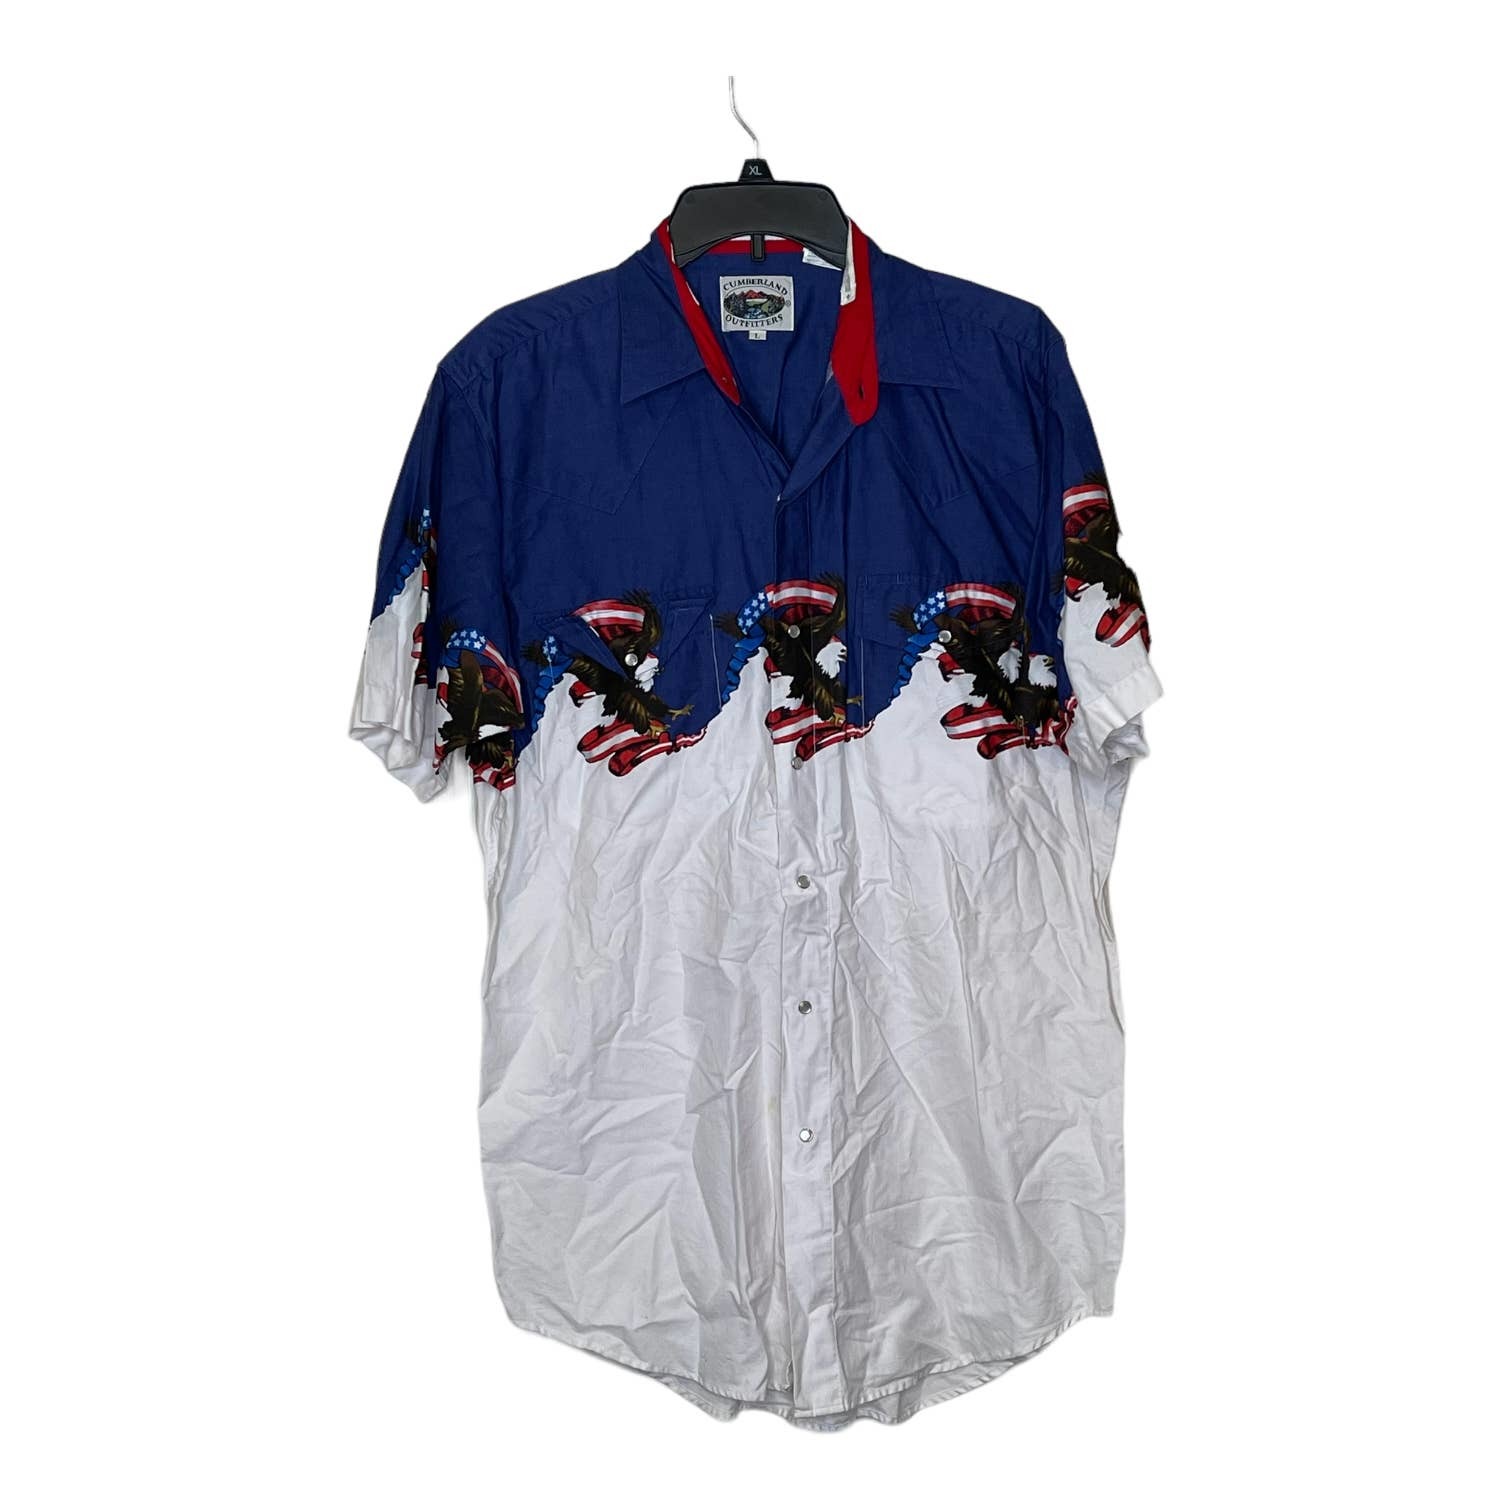 Primary image for Cumberland Outfitters American Flag Eagle Shirt Men Large Shortsleeve Colorblock